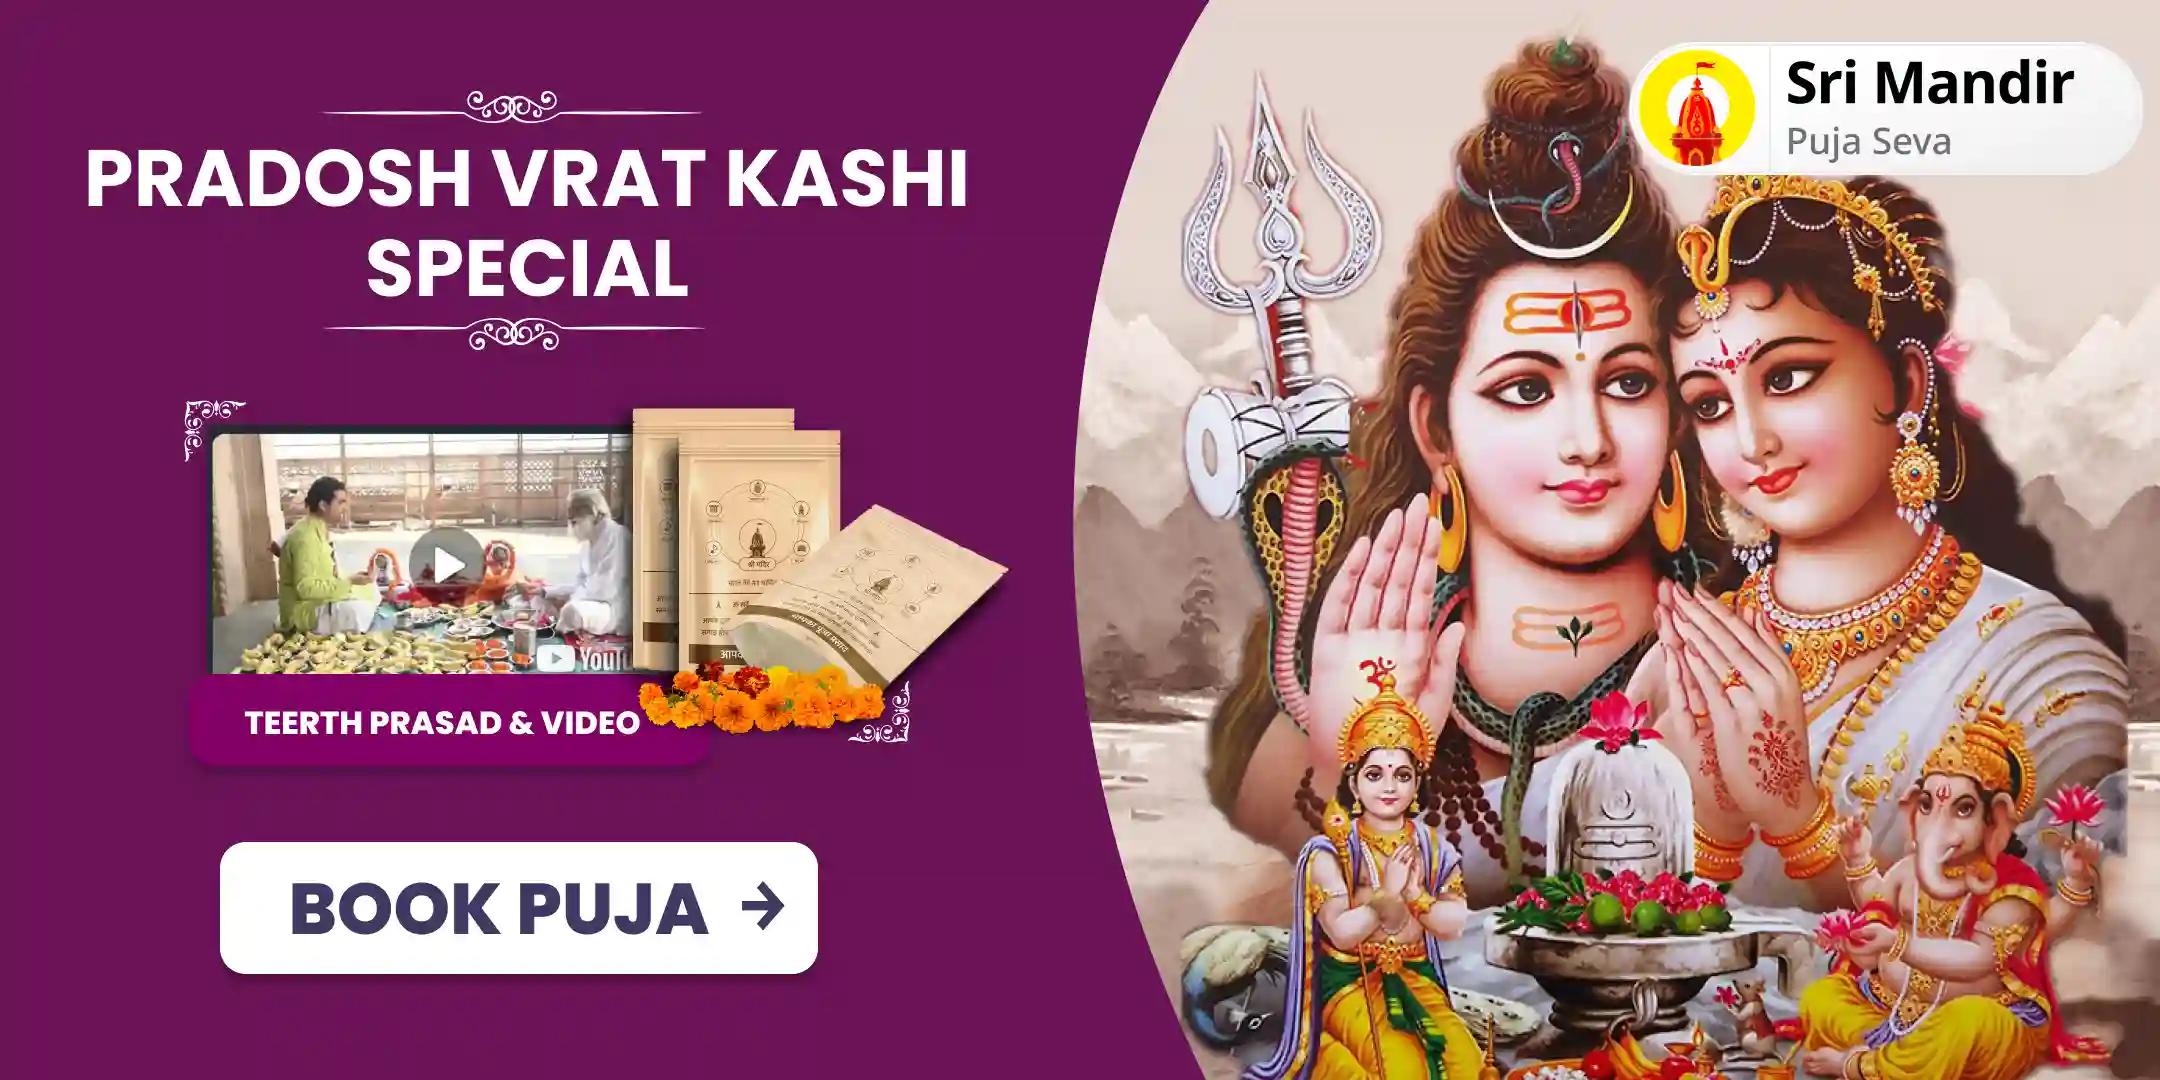 Pradosh Vrat Kashi Special Gauri-Shankar Puja and Shiv-Gauri Stotra Path To Resolve Conflicts and Achieve Bliss in Relationship